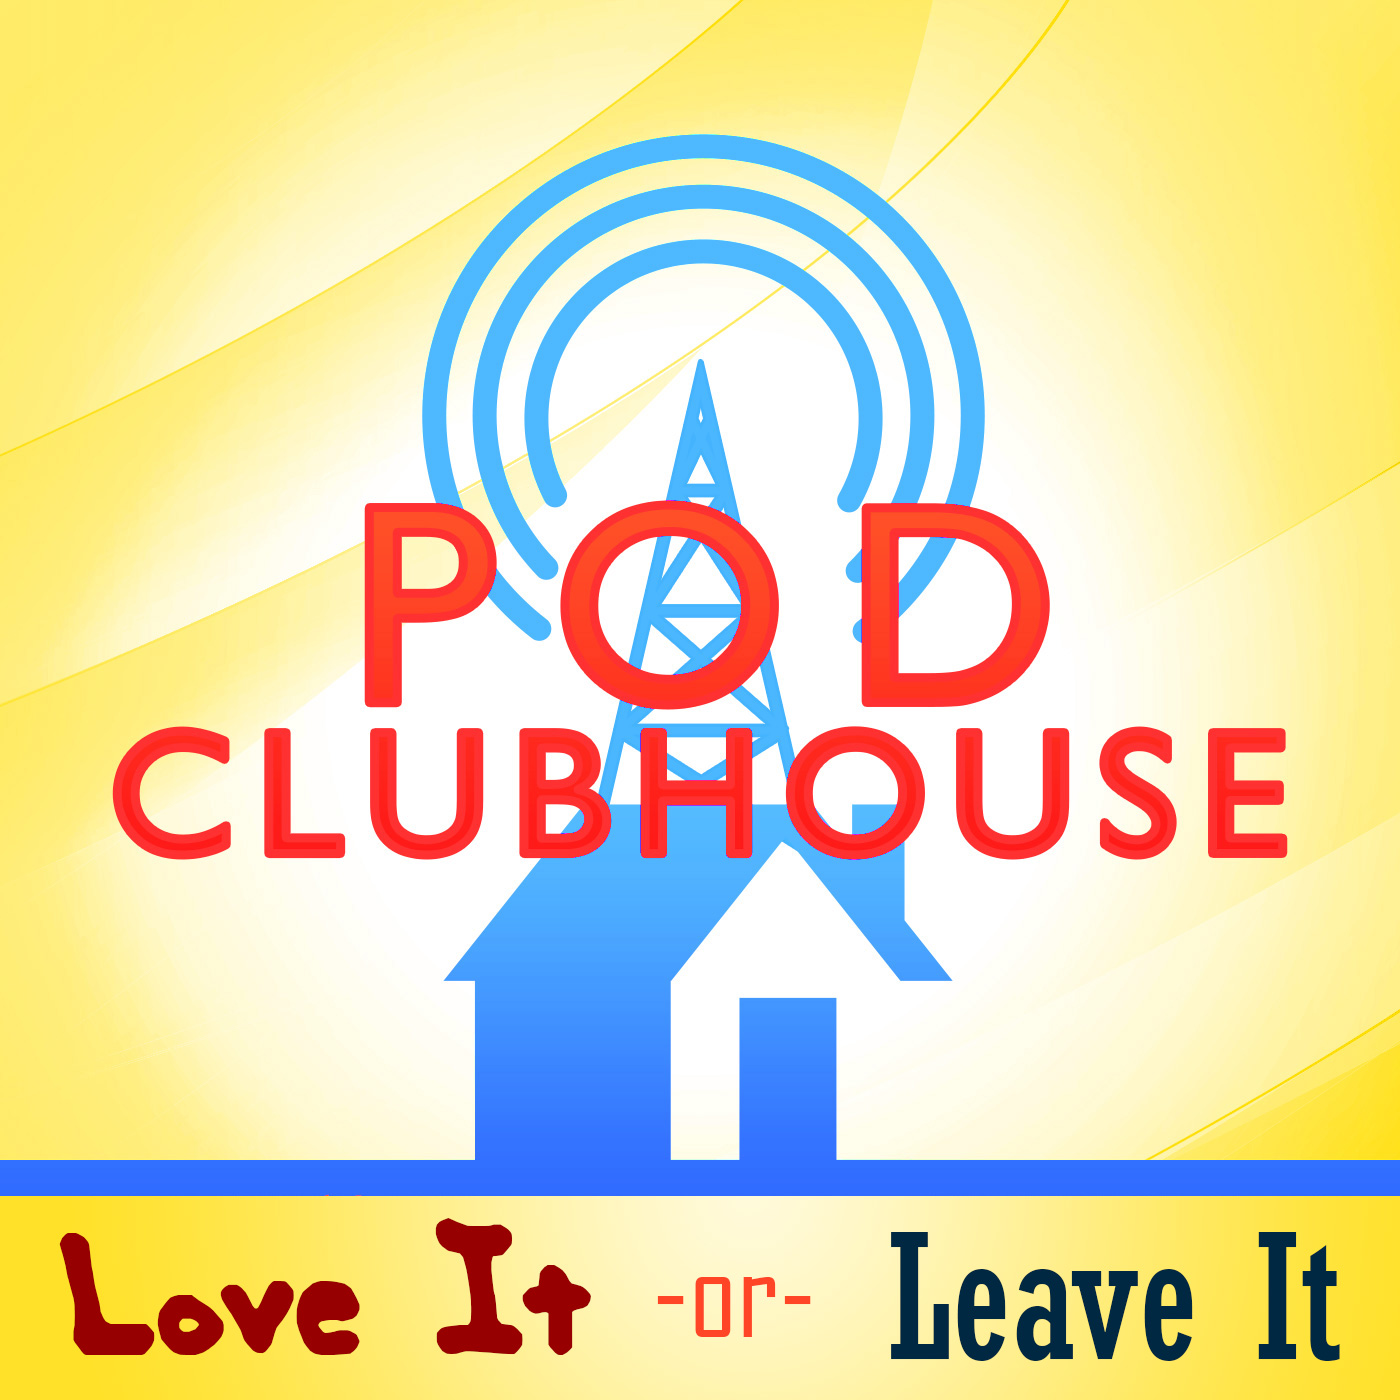 Pod Clubhouse Presents: Love It or Leave It